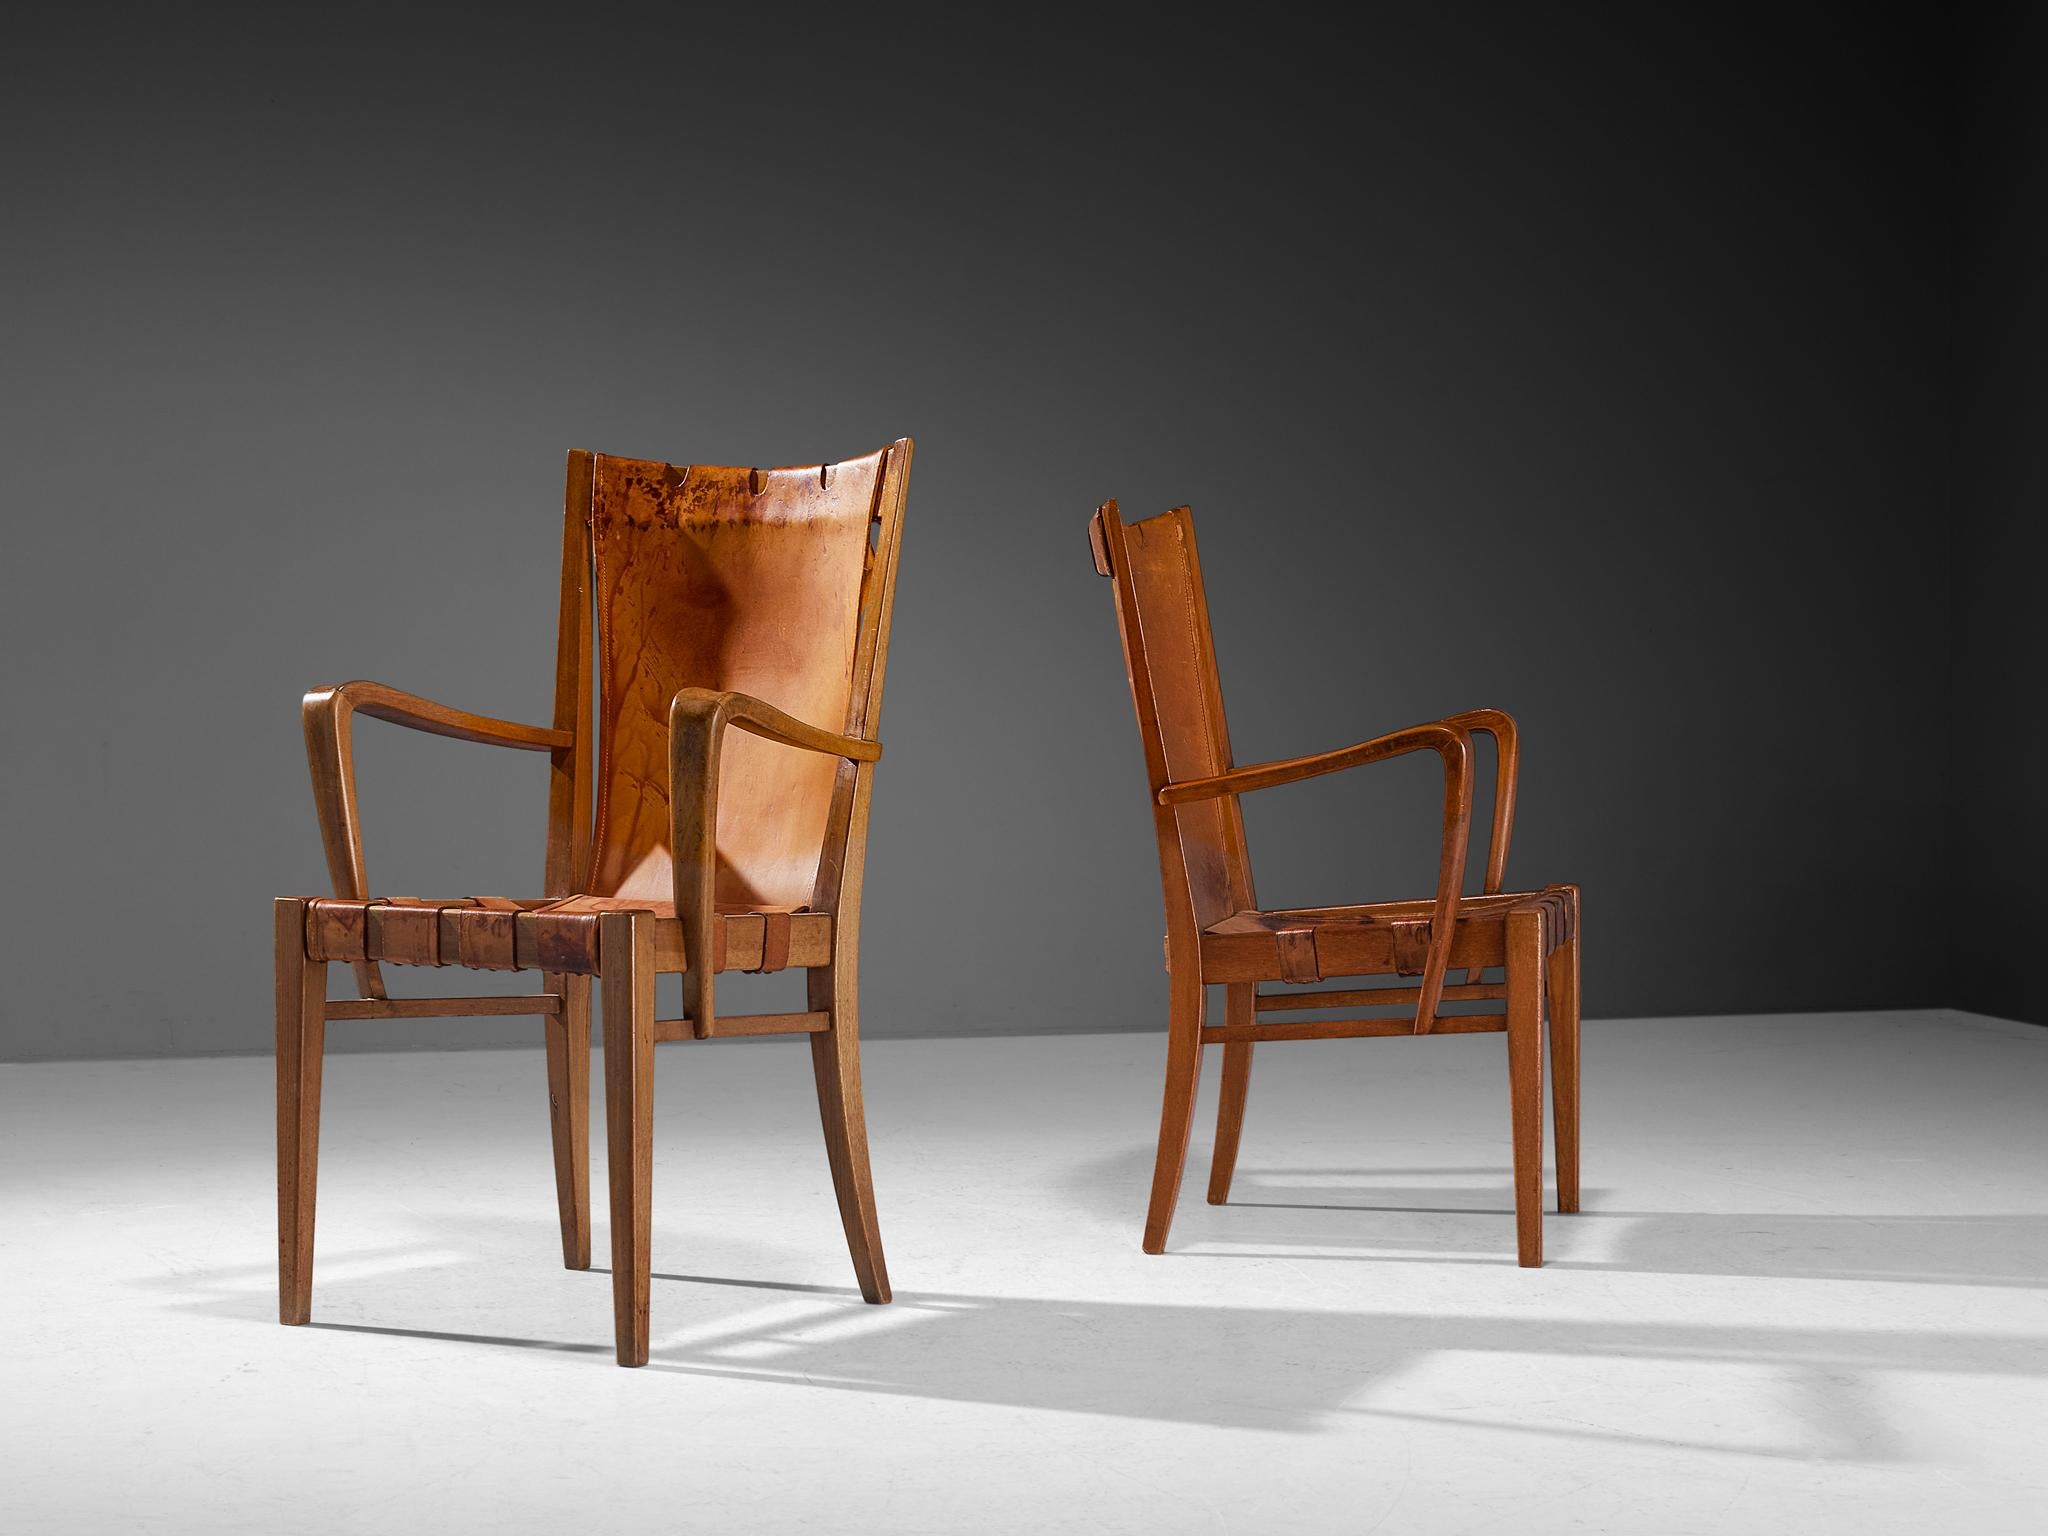 Guglielmo Pecorini, pair of dining chairs, walnut, leather, brass, Italy, circa. 1940 

These wonderfully sculpted chairs are designed by Italian designer Guglielmo Pecorini The sincere construction and type of upholstery, give the chair a